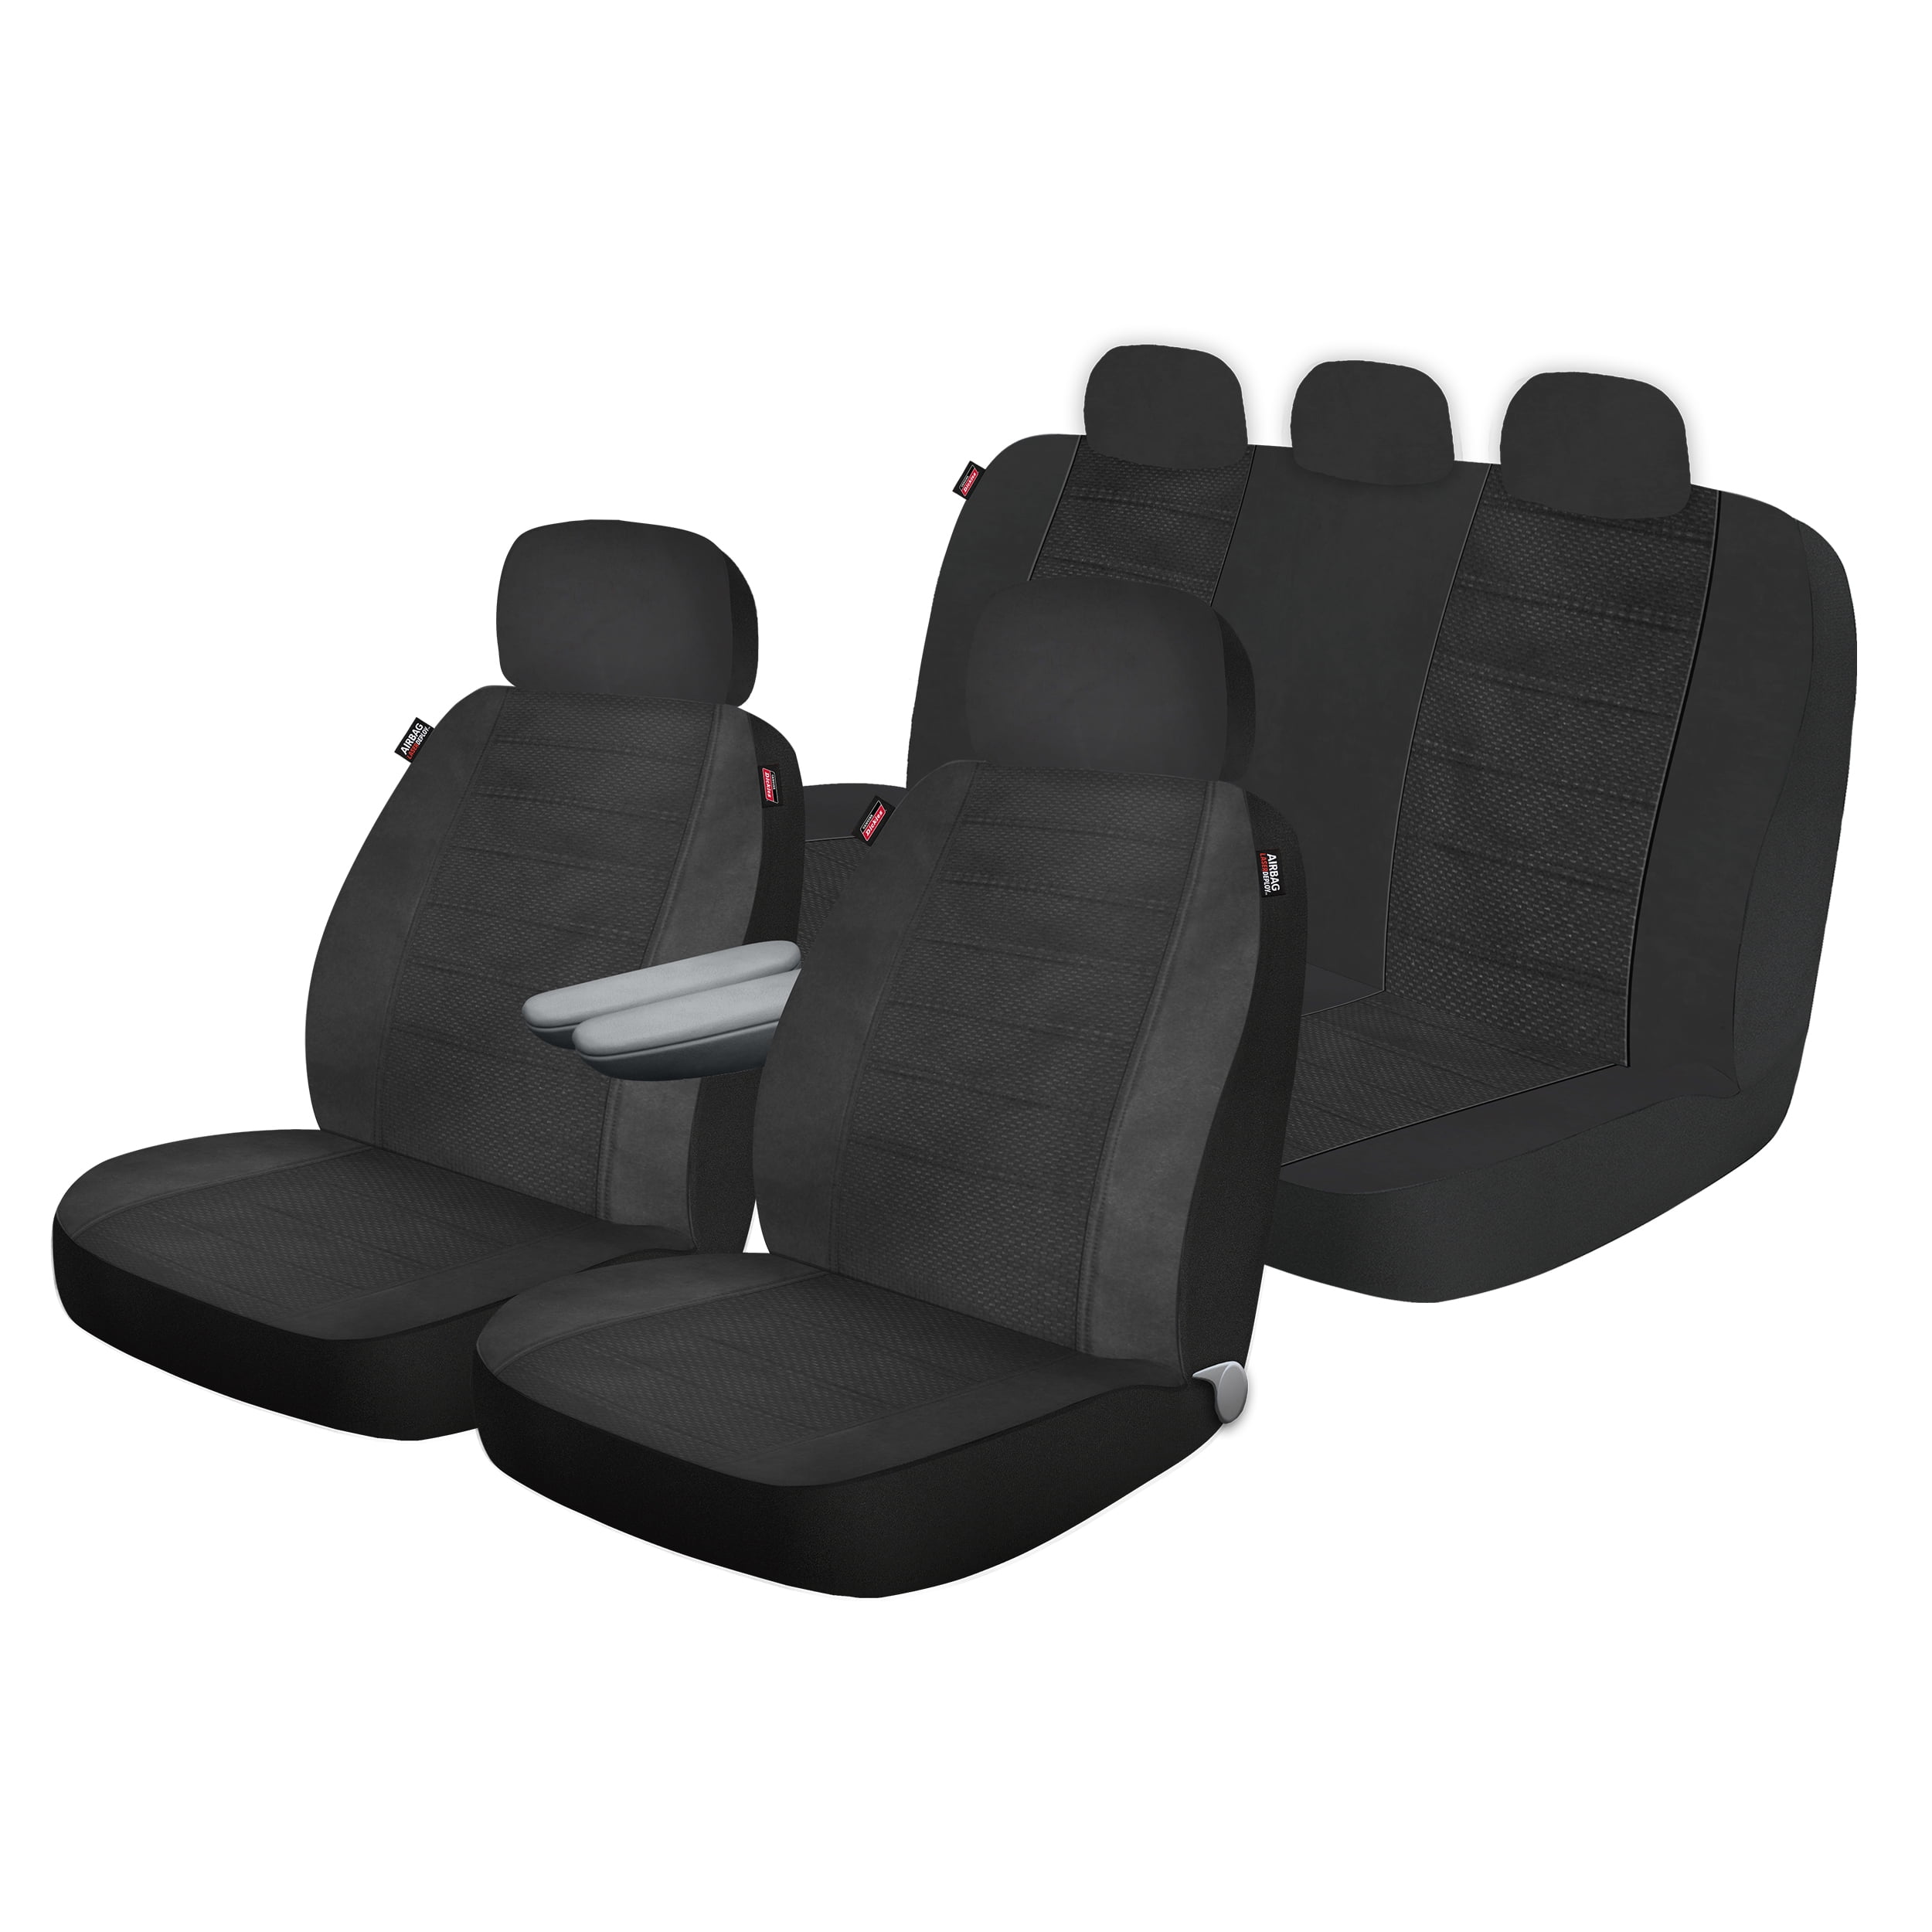 Luxury GREY/BLACK Leather Look Car Seat Covers Mercedes M Class Full Set 